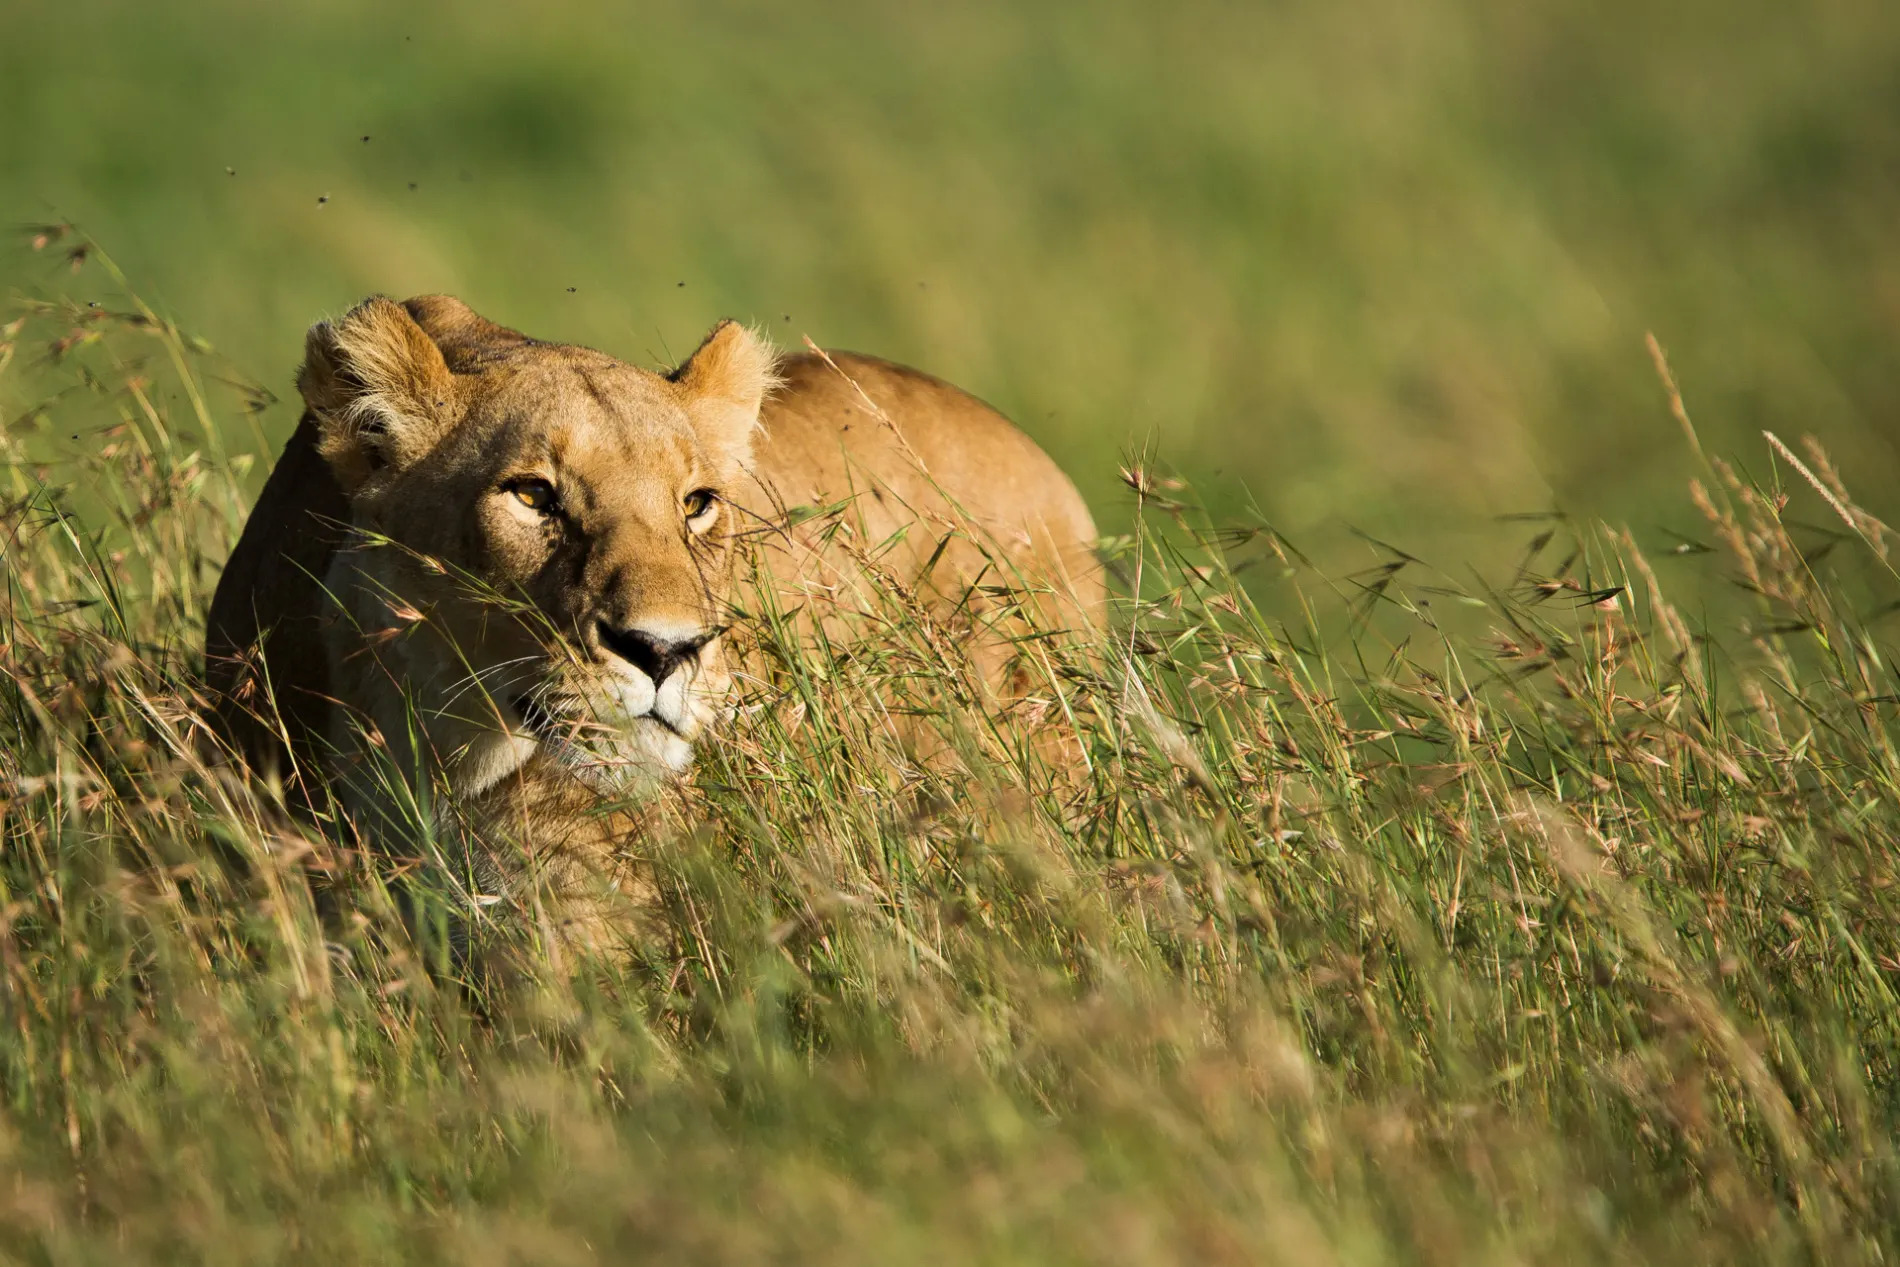 Lioness in grass